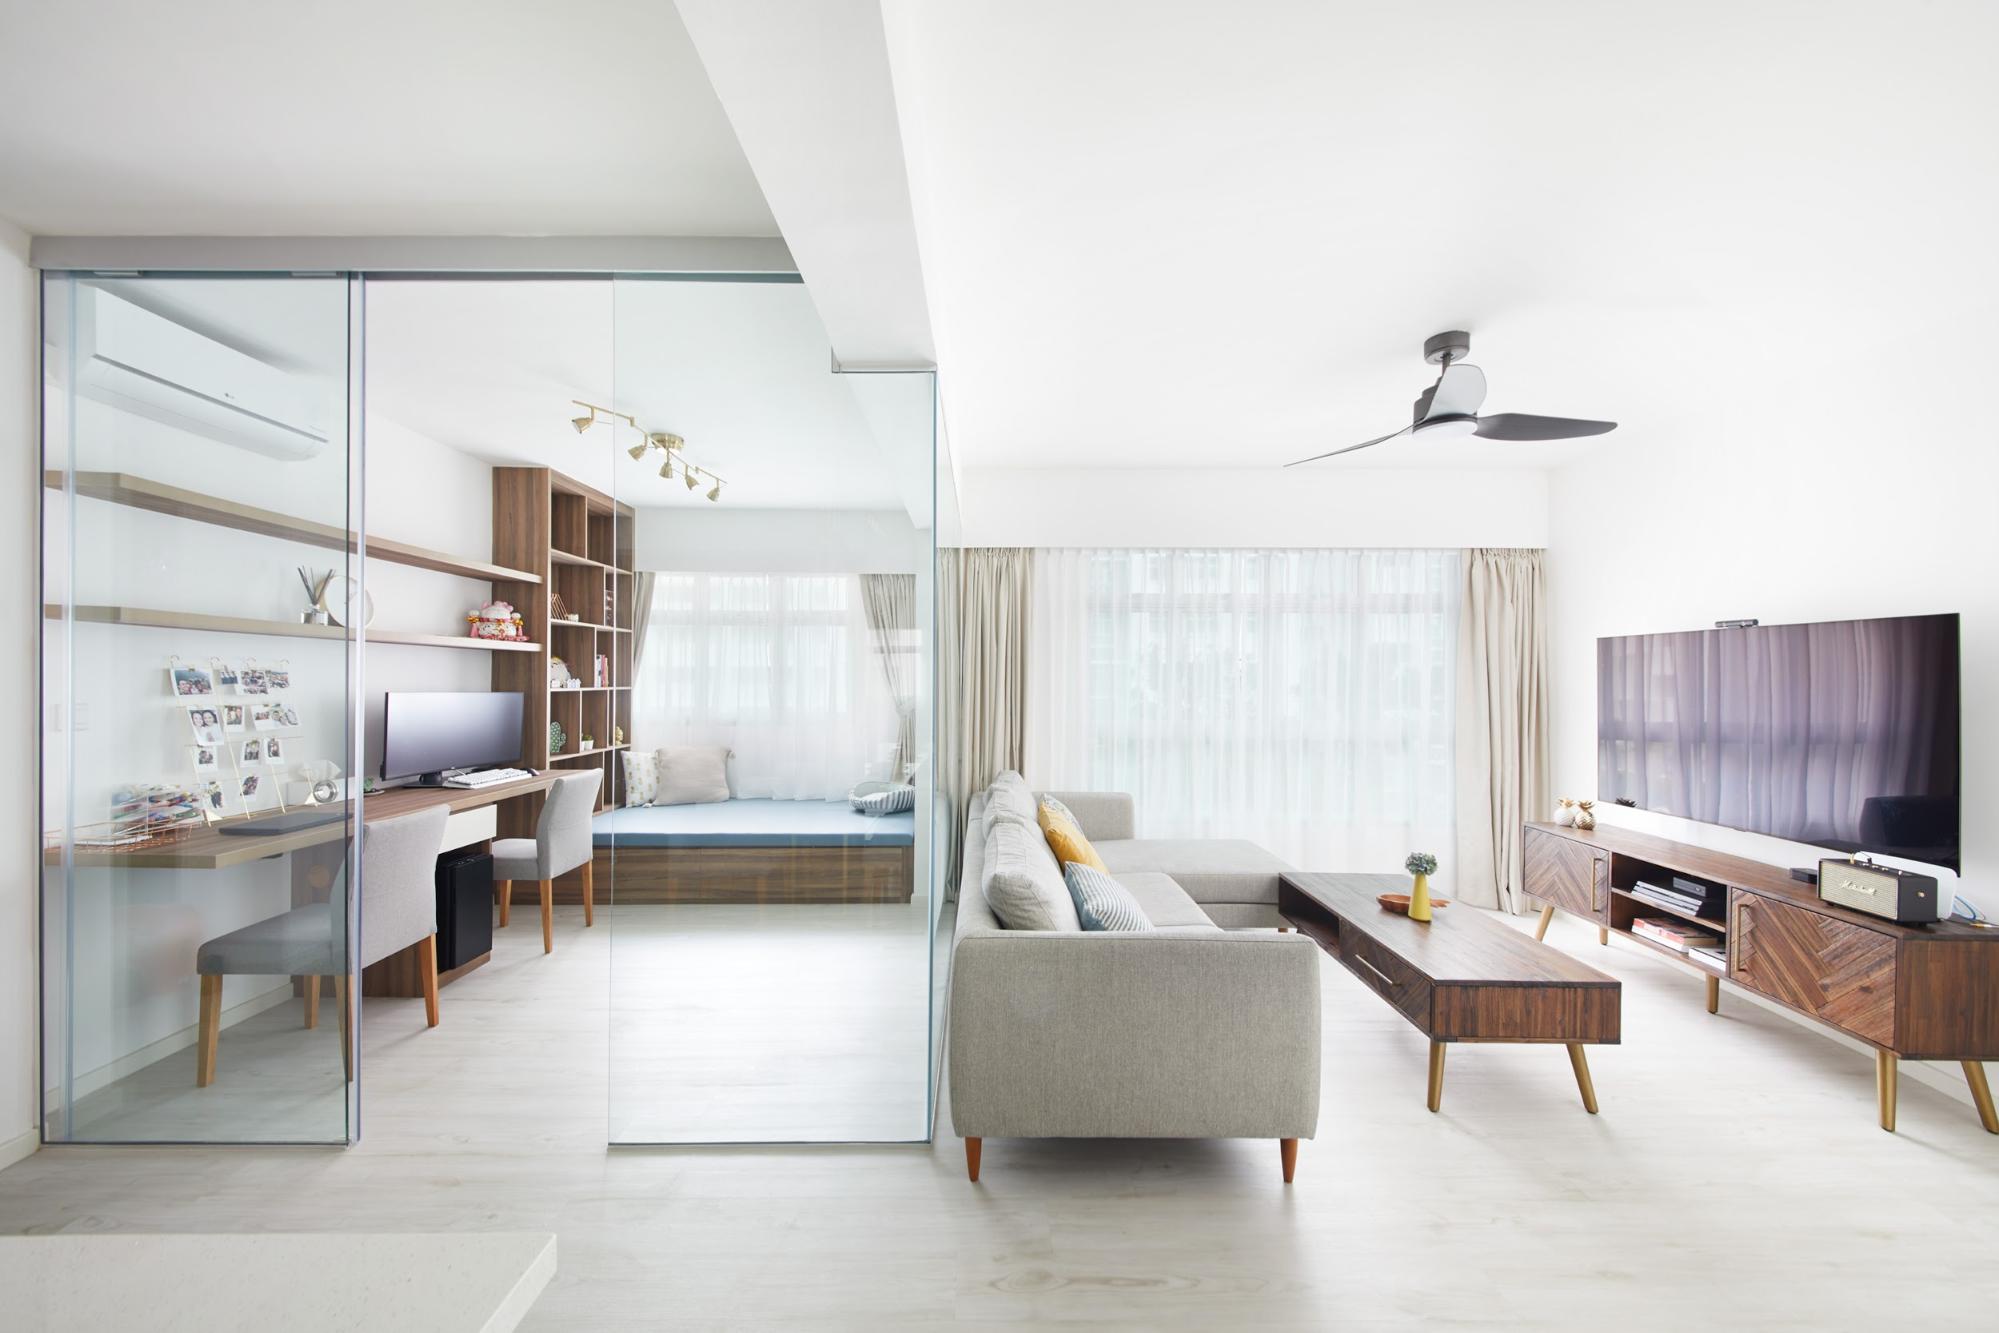 5 Hdb Renovation Tips So Your Home Looks Big Spacious Classy